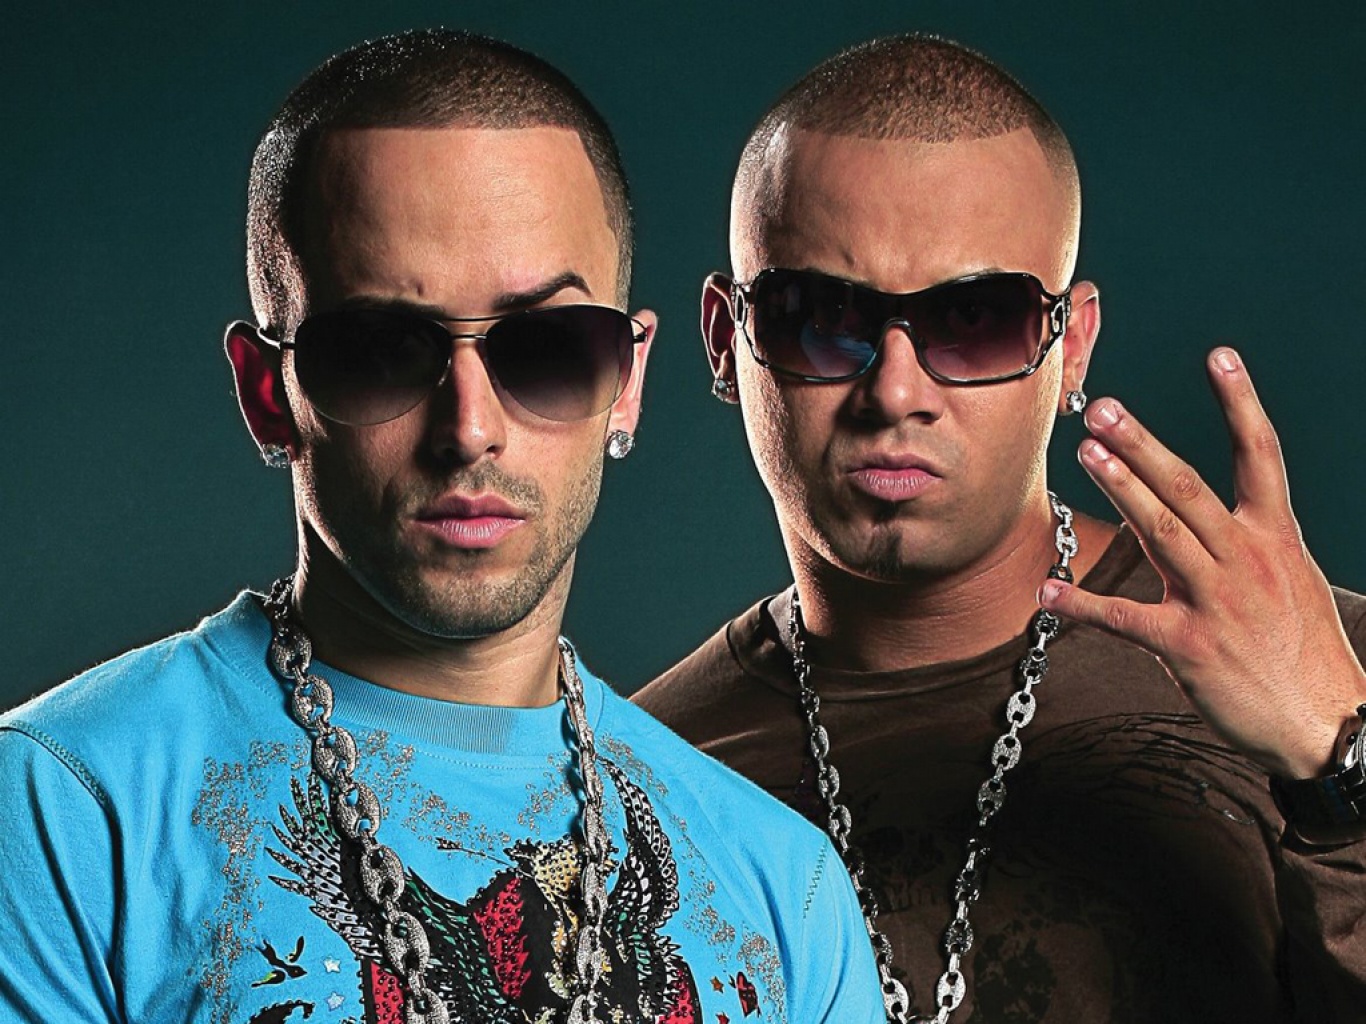 Never No One Went Harder on Ed Hardy than Wisin y Yandel